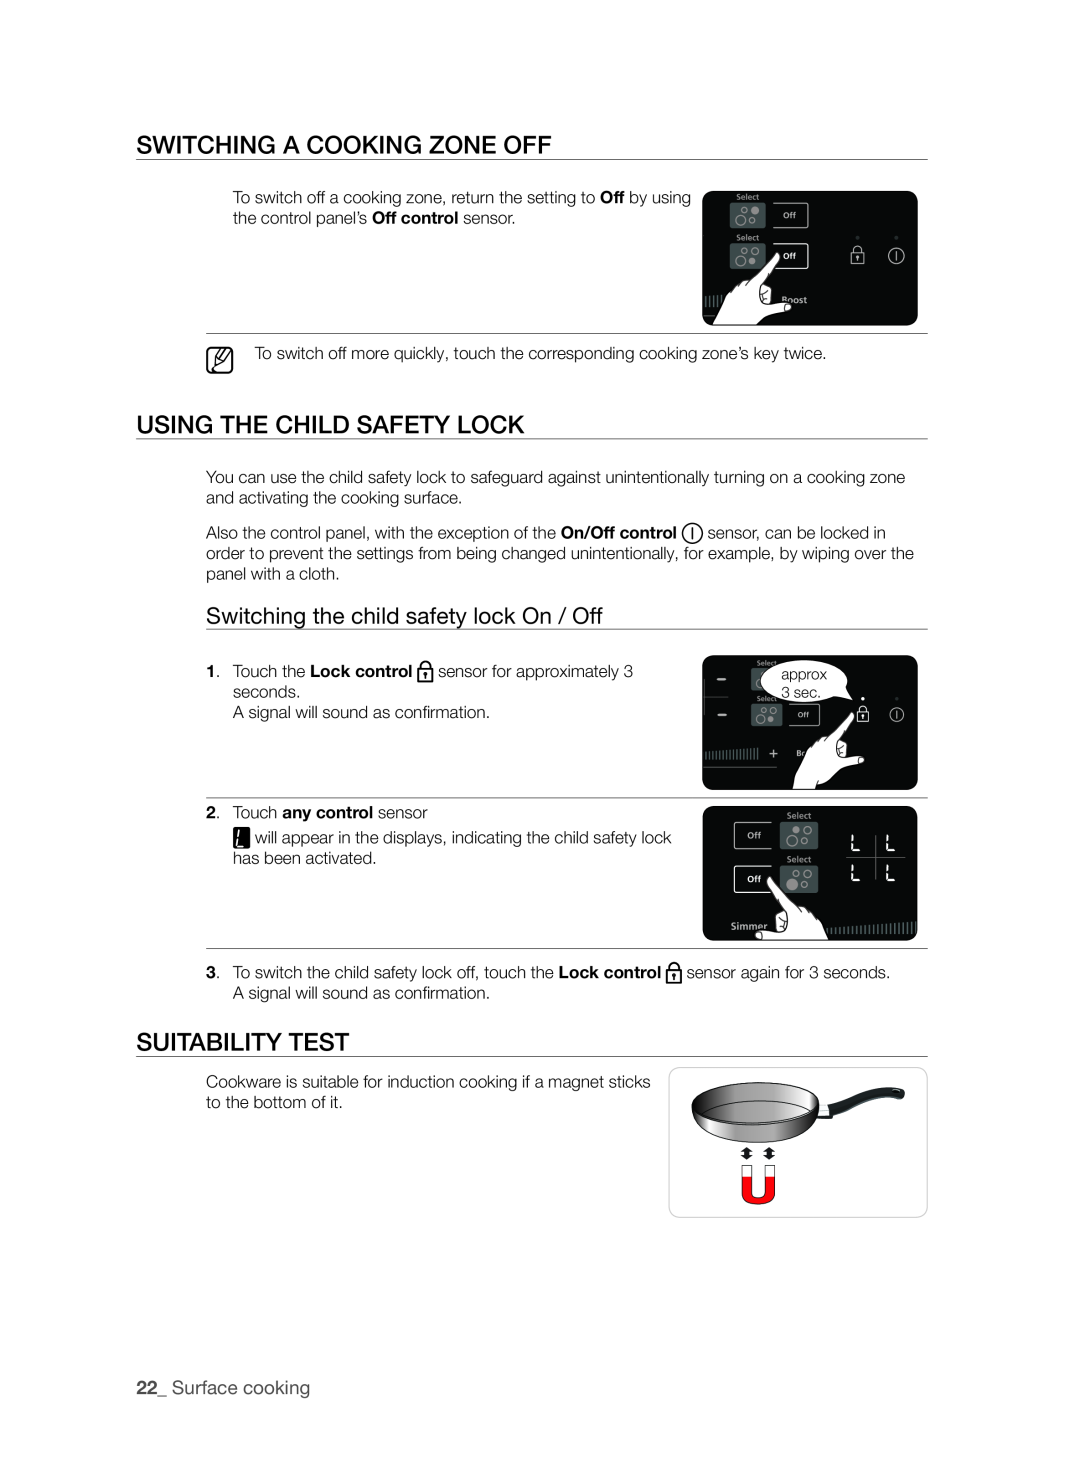 Samsung FTQ307NWGX user manual Switching a cooking zone off, Using the child safety lock, Suitability test, Surface cooking 